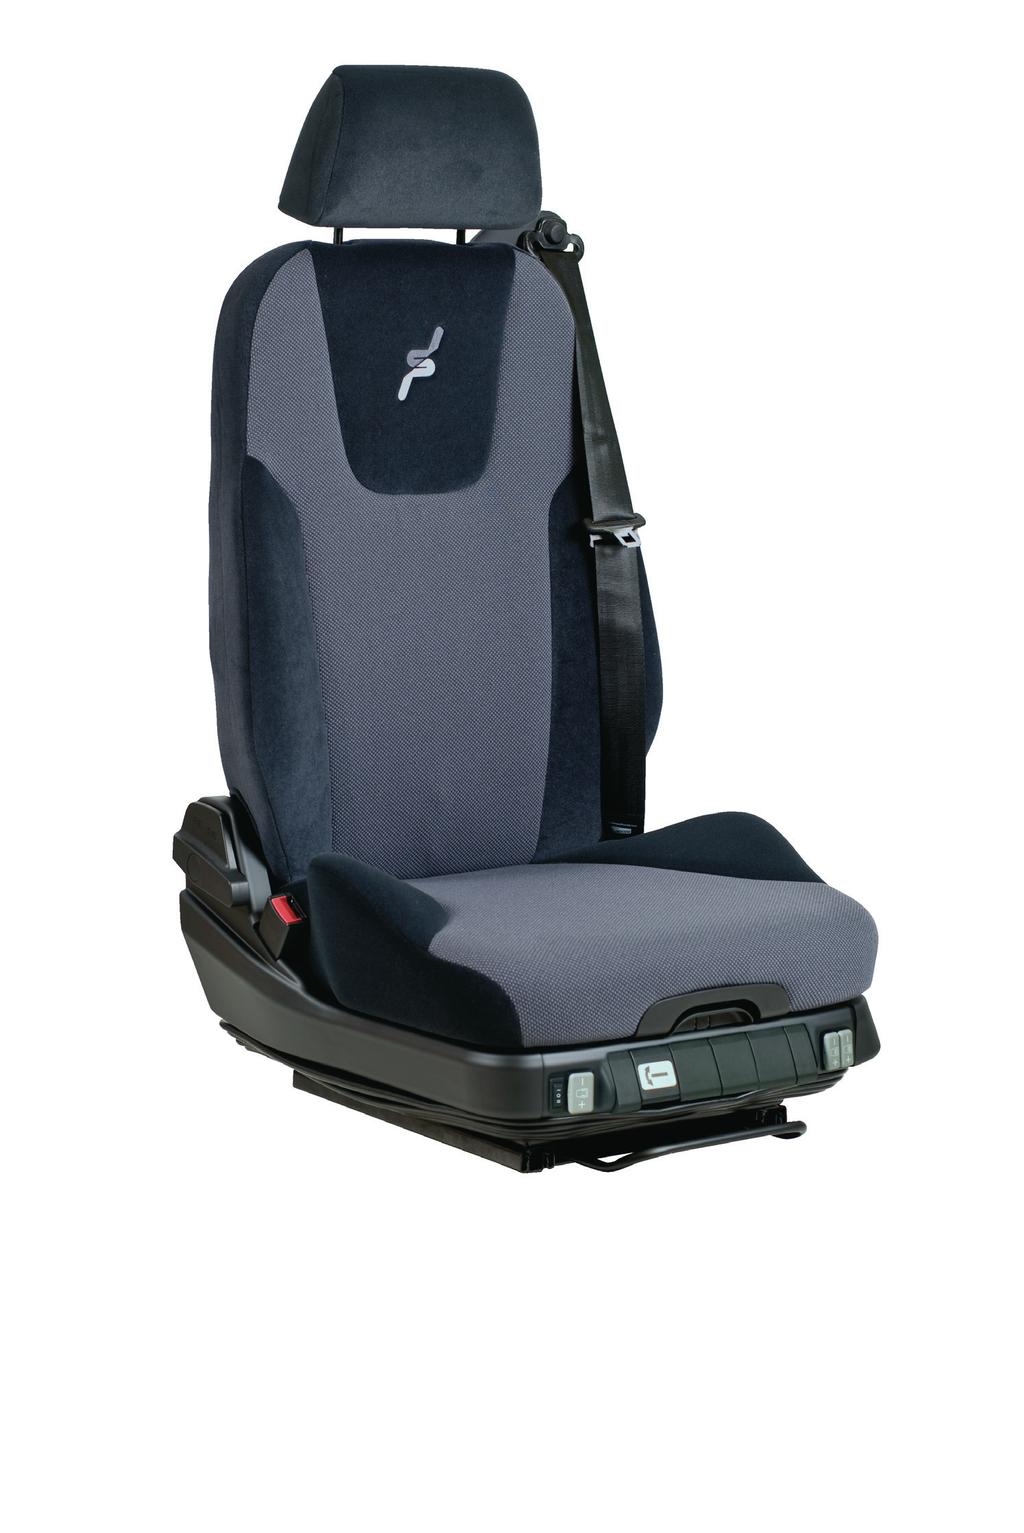 Be-Ge 38-series The seat pictured contains optional features.